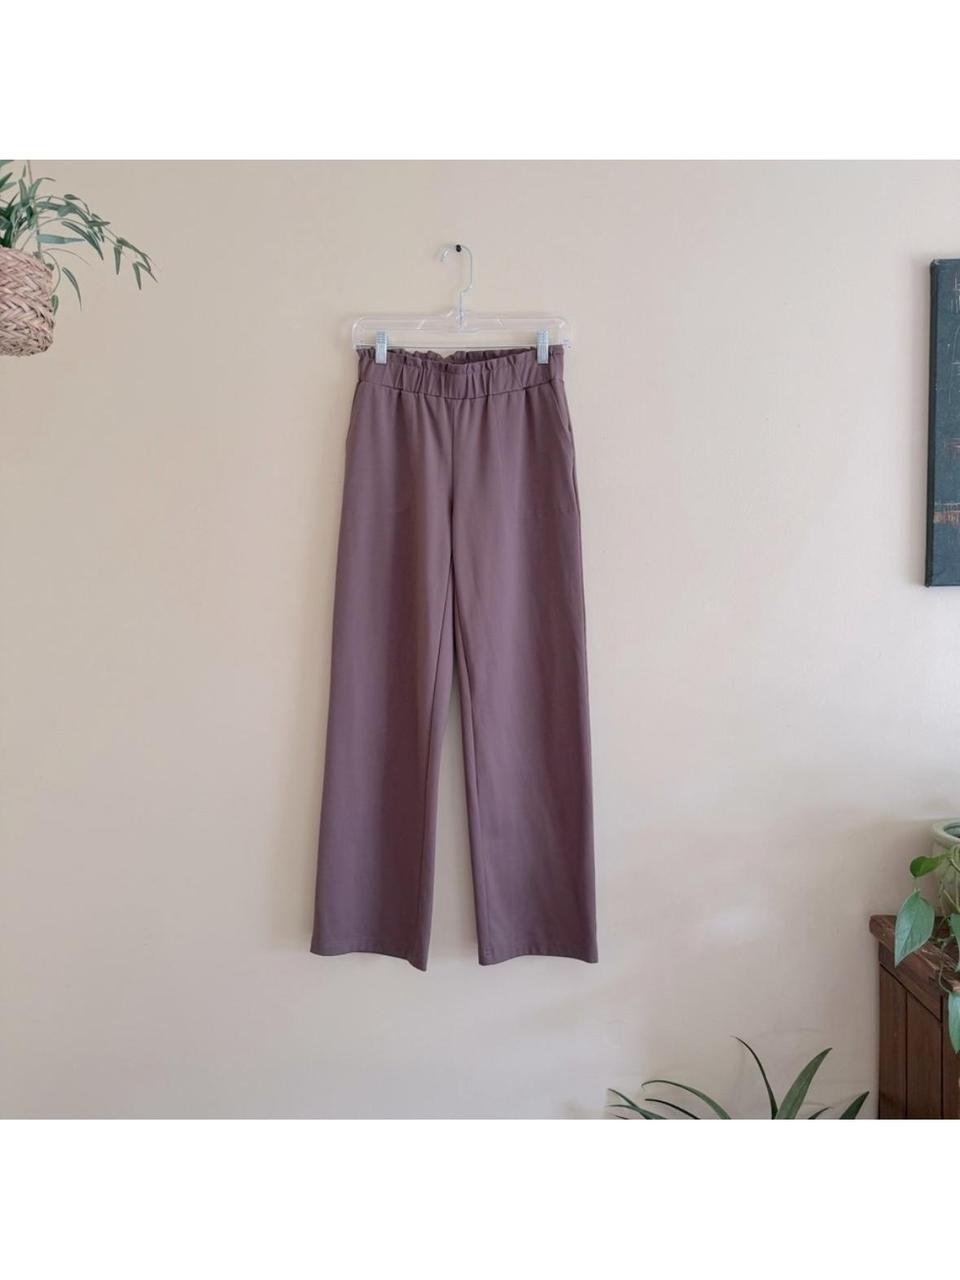 Joie Women's Brown and Purple Trousers